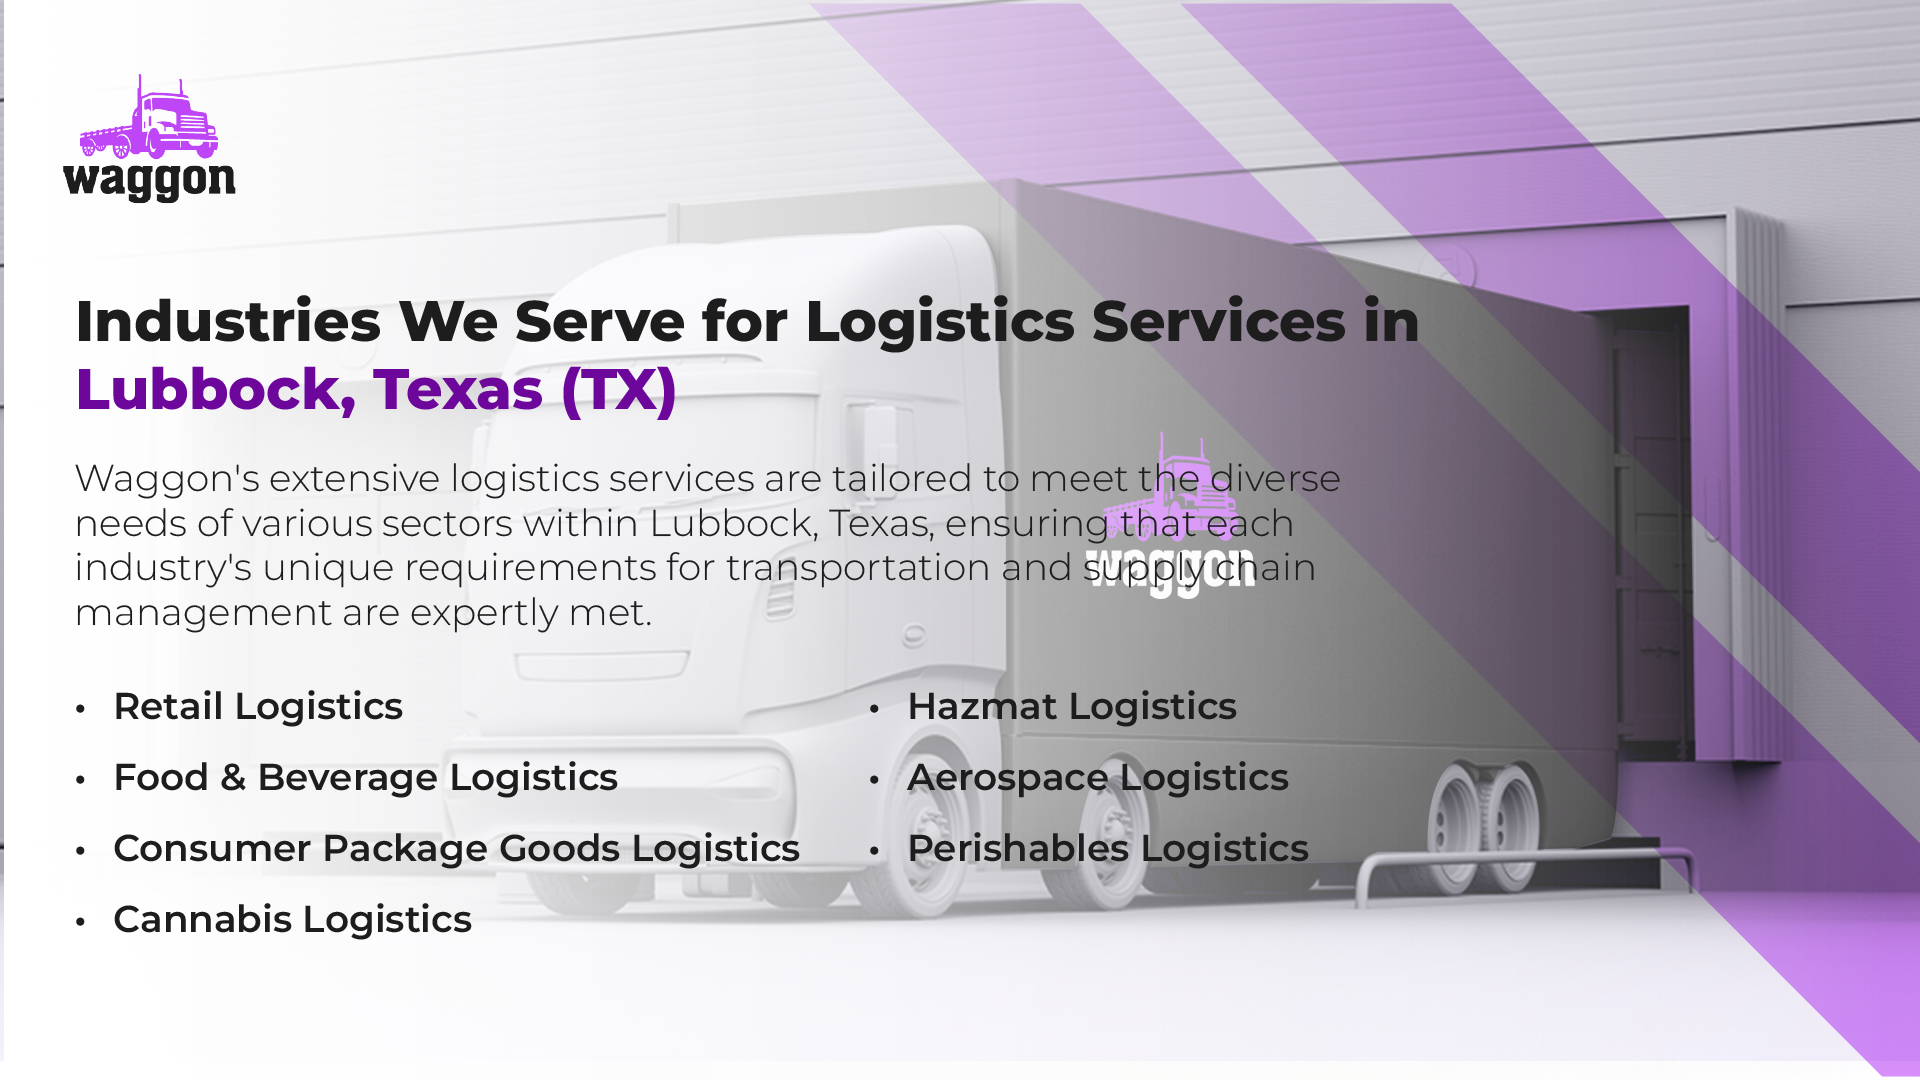 Industries We Serve for Logistics Services in Lubbock, Texas (TX)